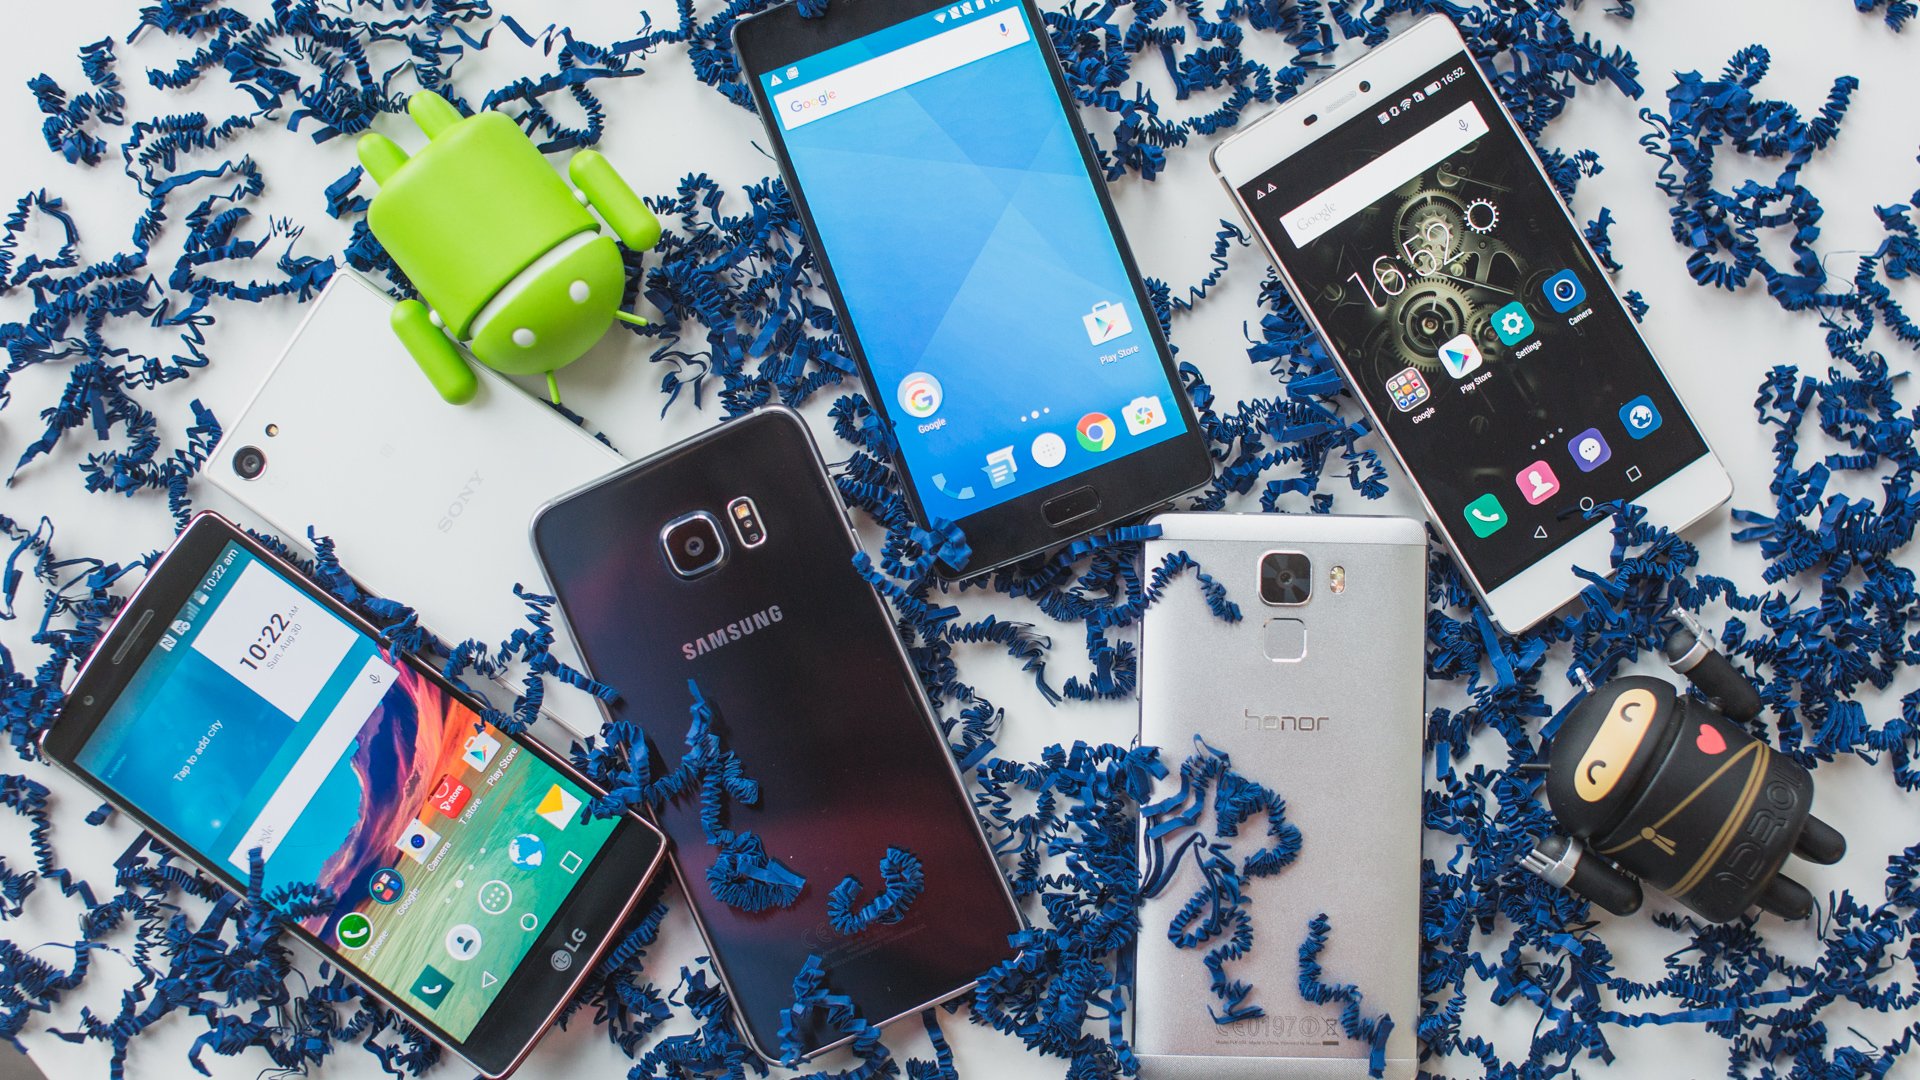 Will you use carnival to organize your Android? What tips do you give the most messy?